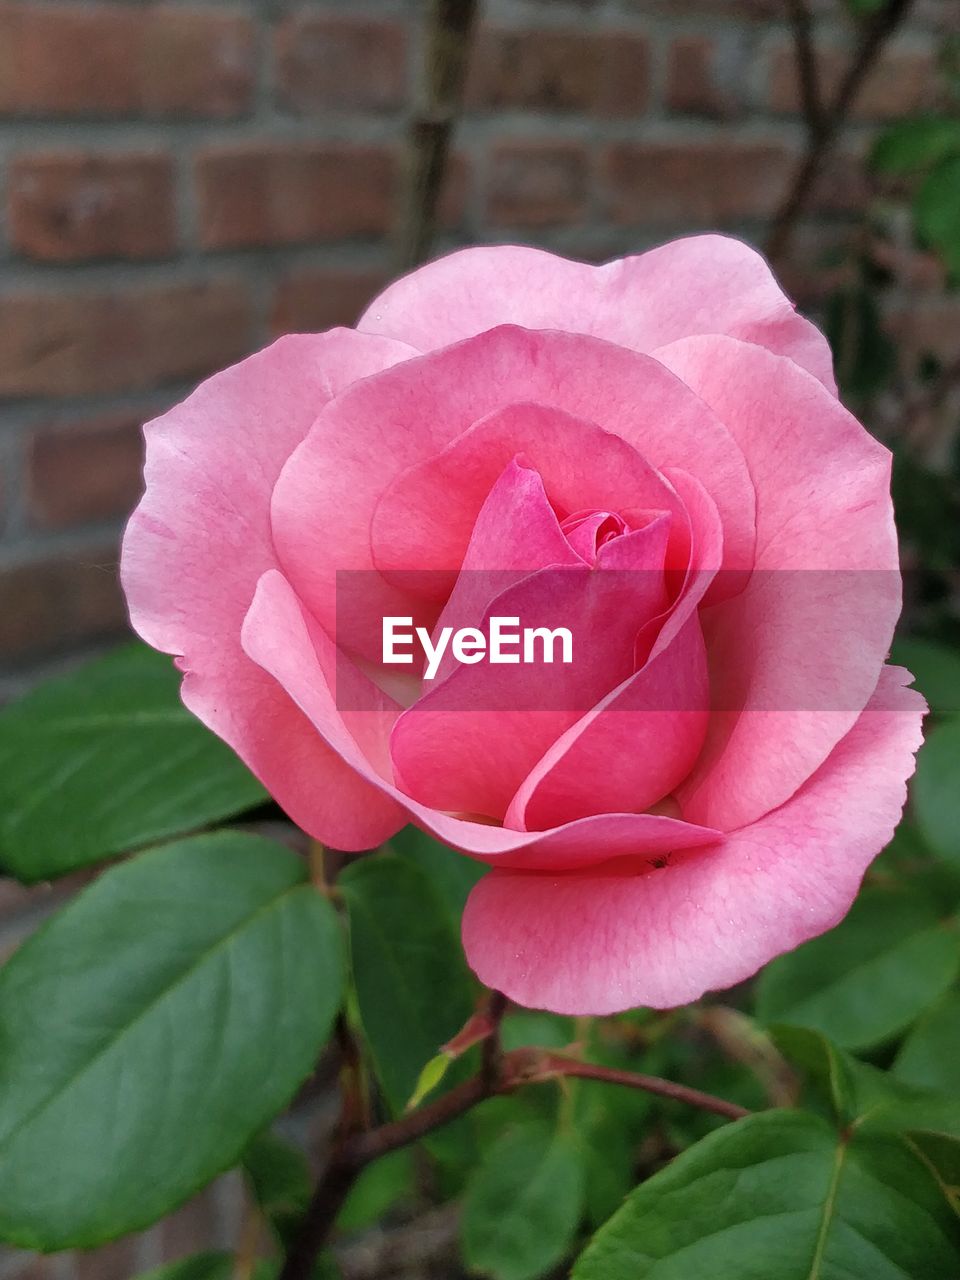 CLOSE-UP OF PINK ROSE WITH PLANT